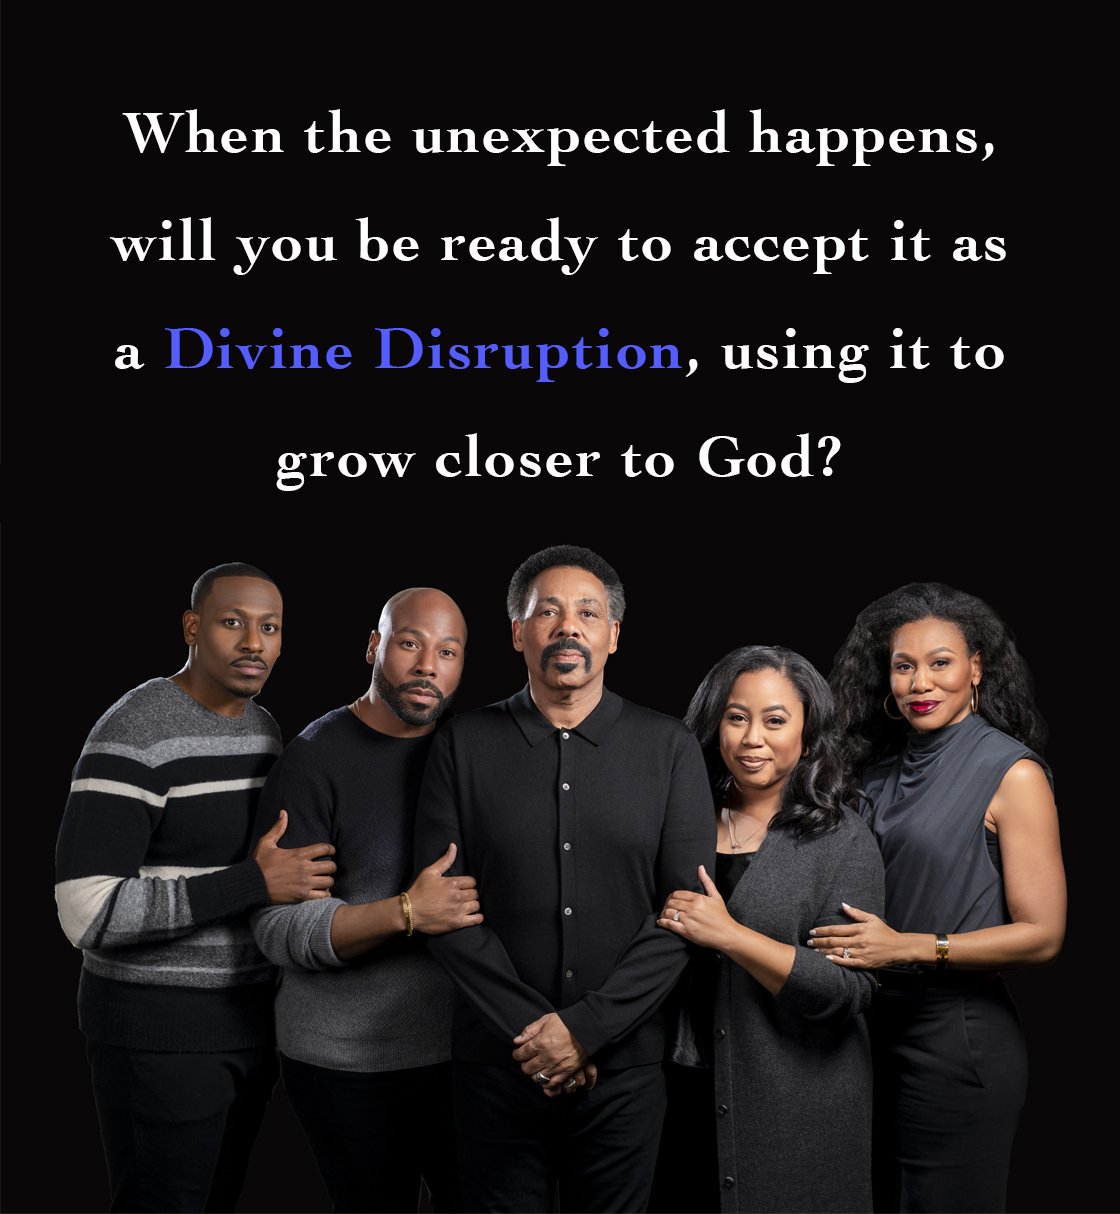 When the unexpected happens, will you be ready to accept it as a divine disruption, using it to grow closer to God?